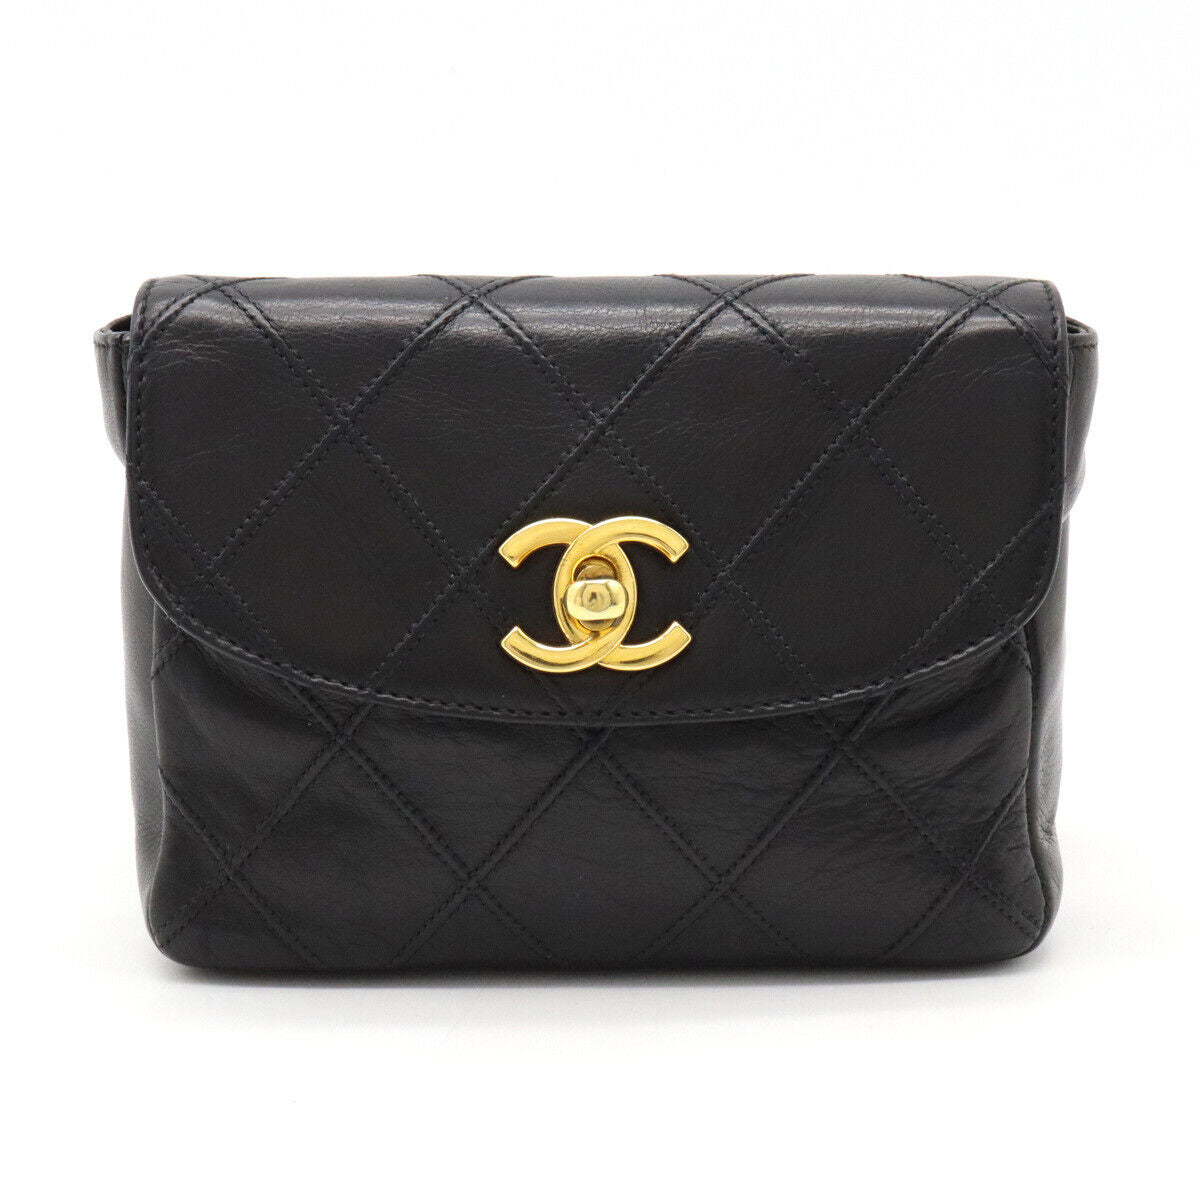 BLACK LEATHER WITH OPAQUE GOLD-TONE METAL CLASSIC BELT BAG, CHANEL